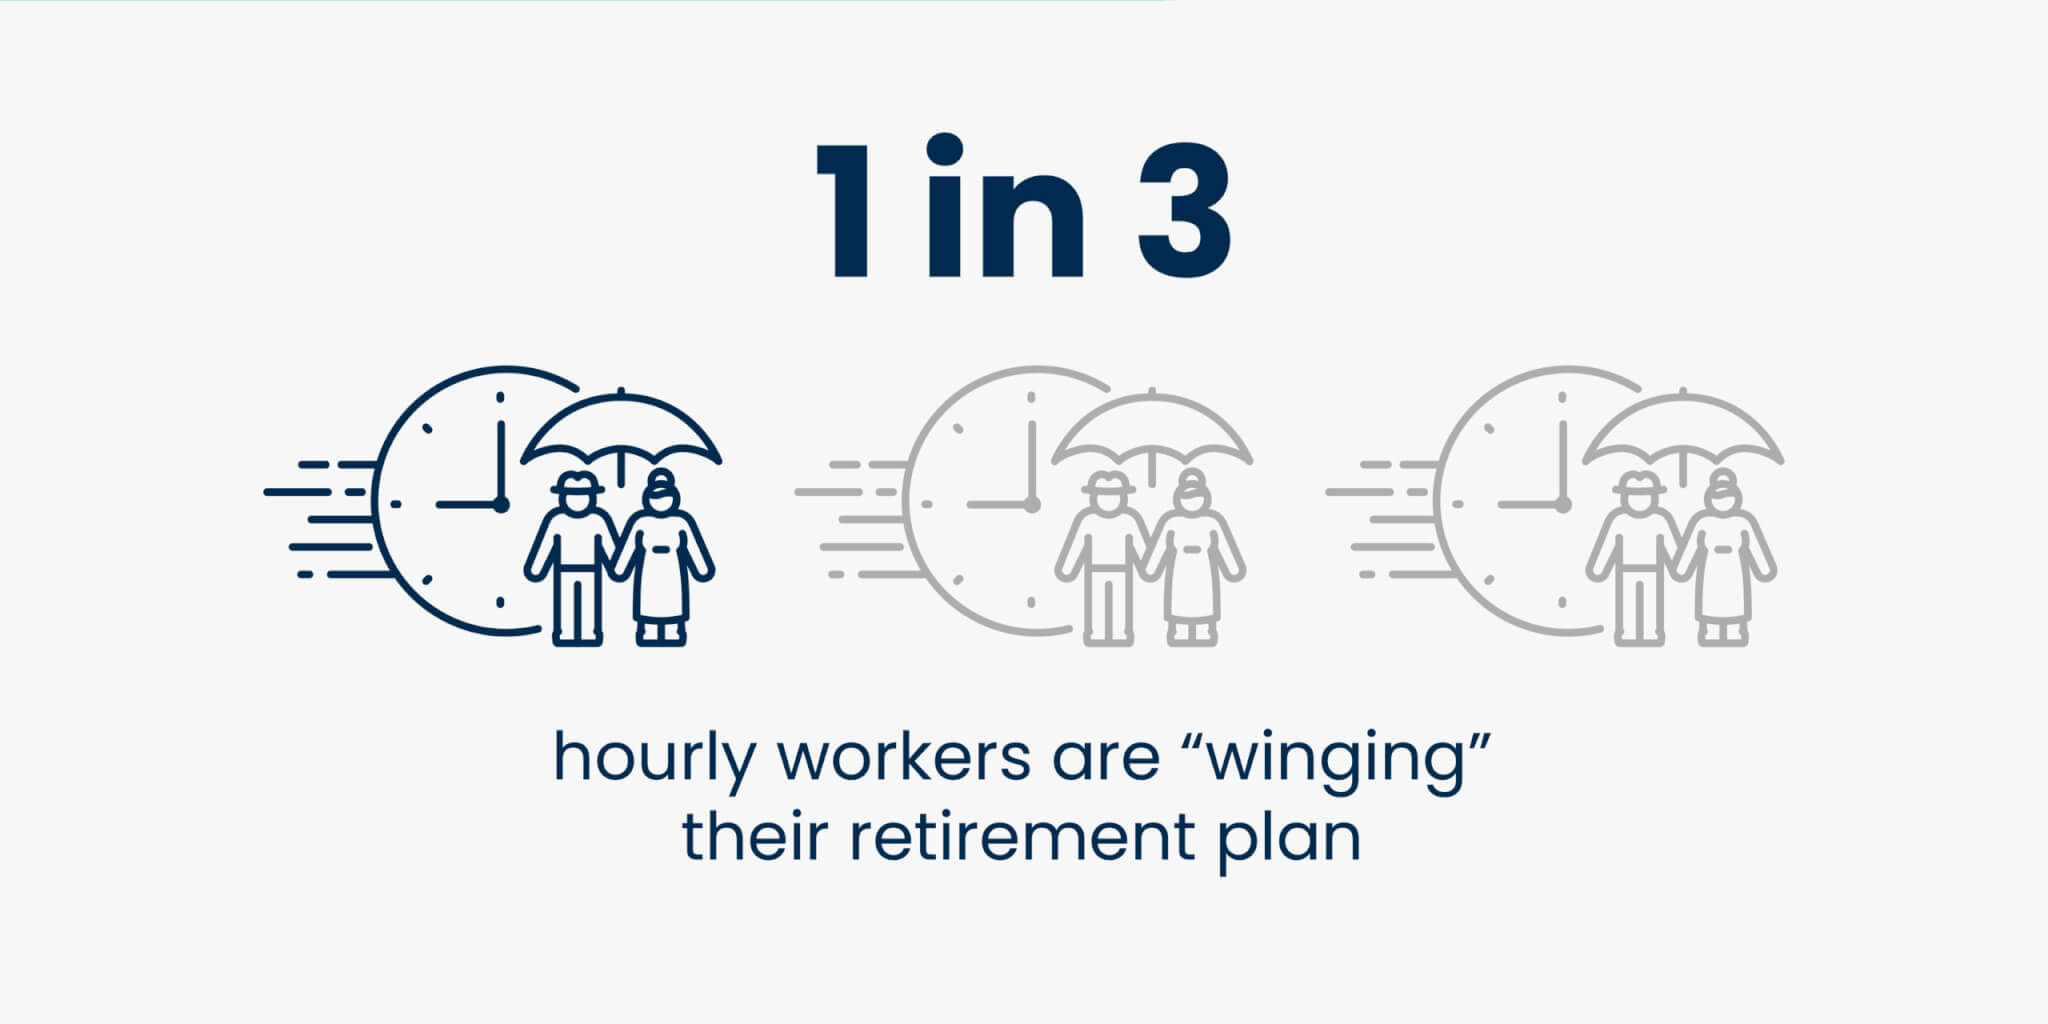 When will you retire? 33% of hourly workers are 'winging' their future plans